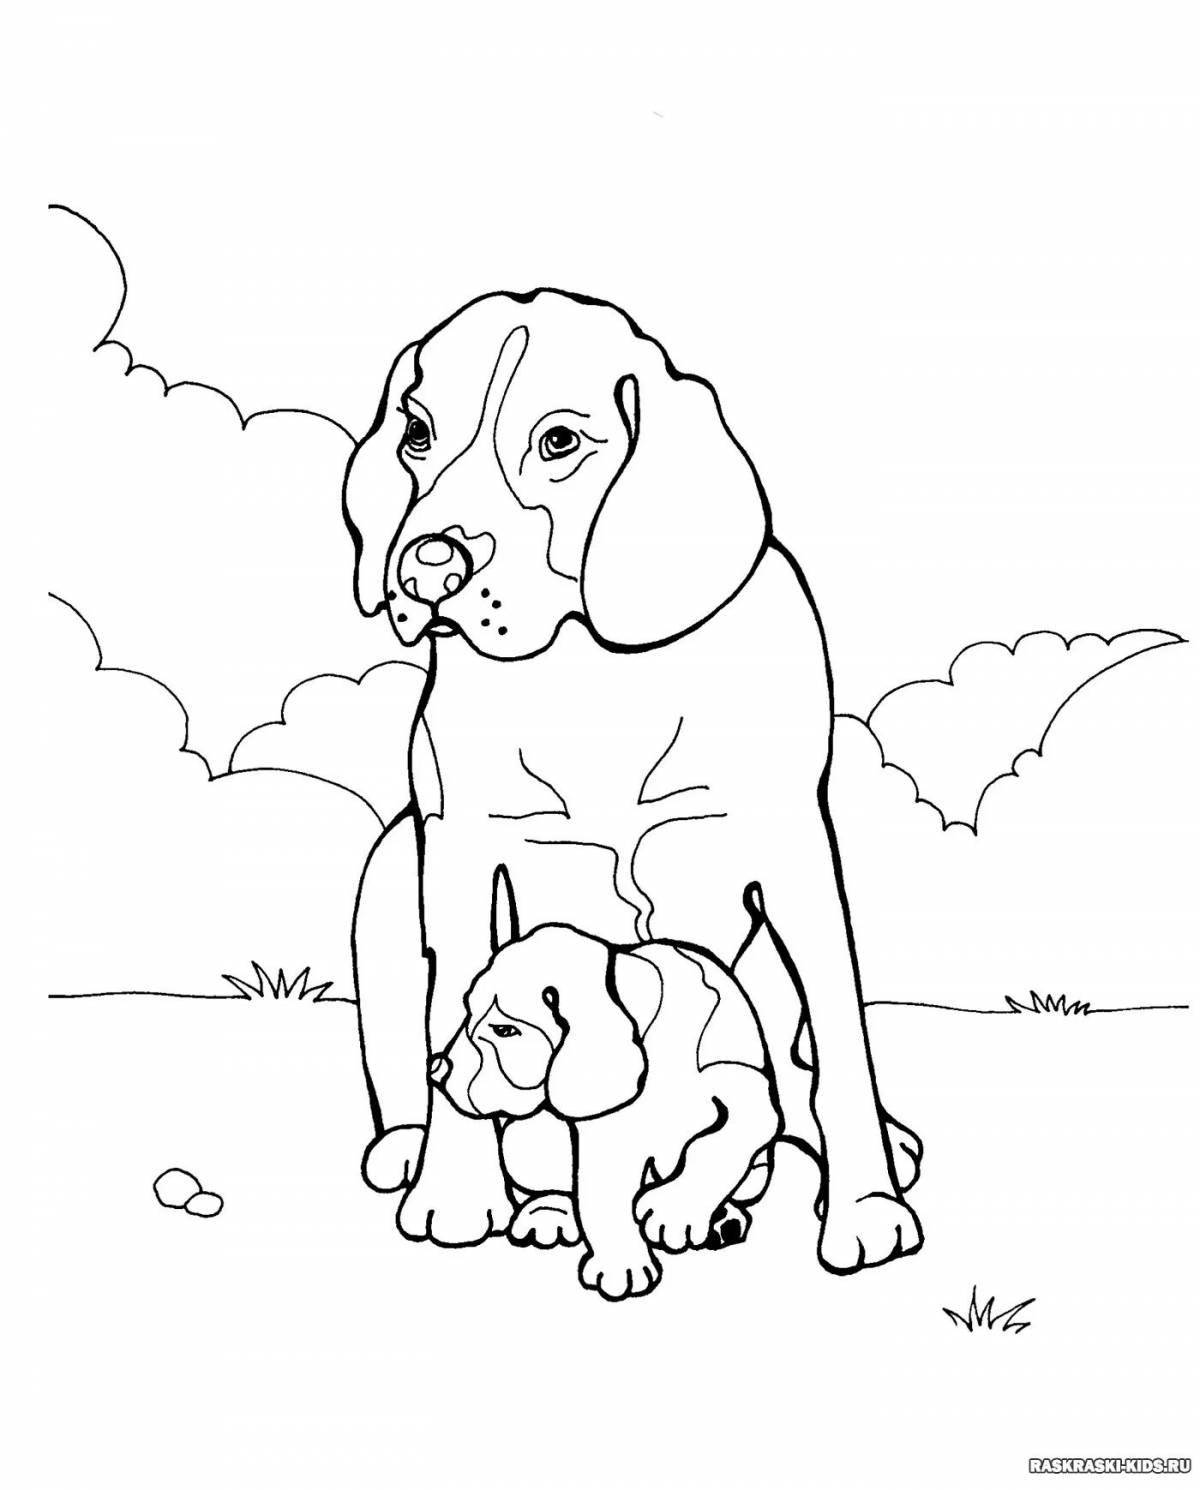 Fun coloring book animals and their babies for kids